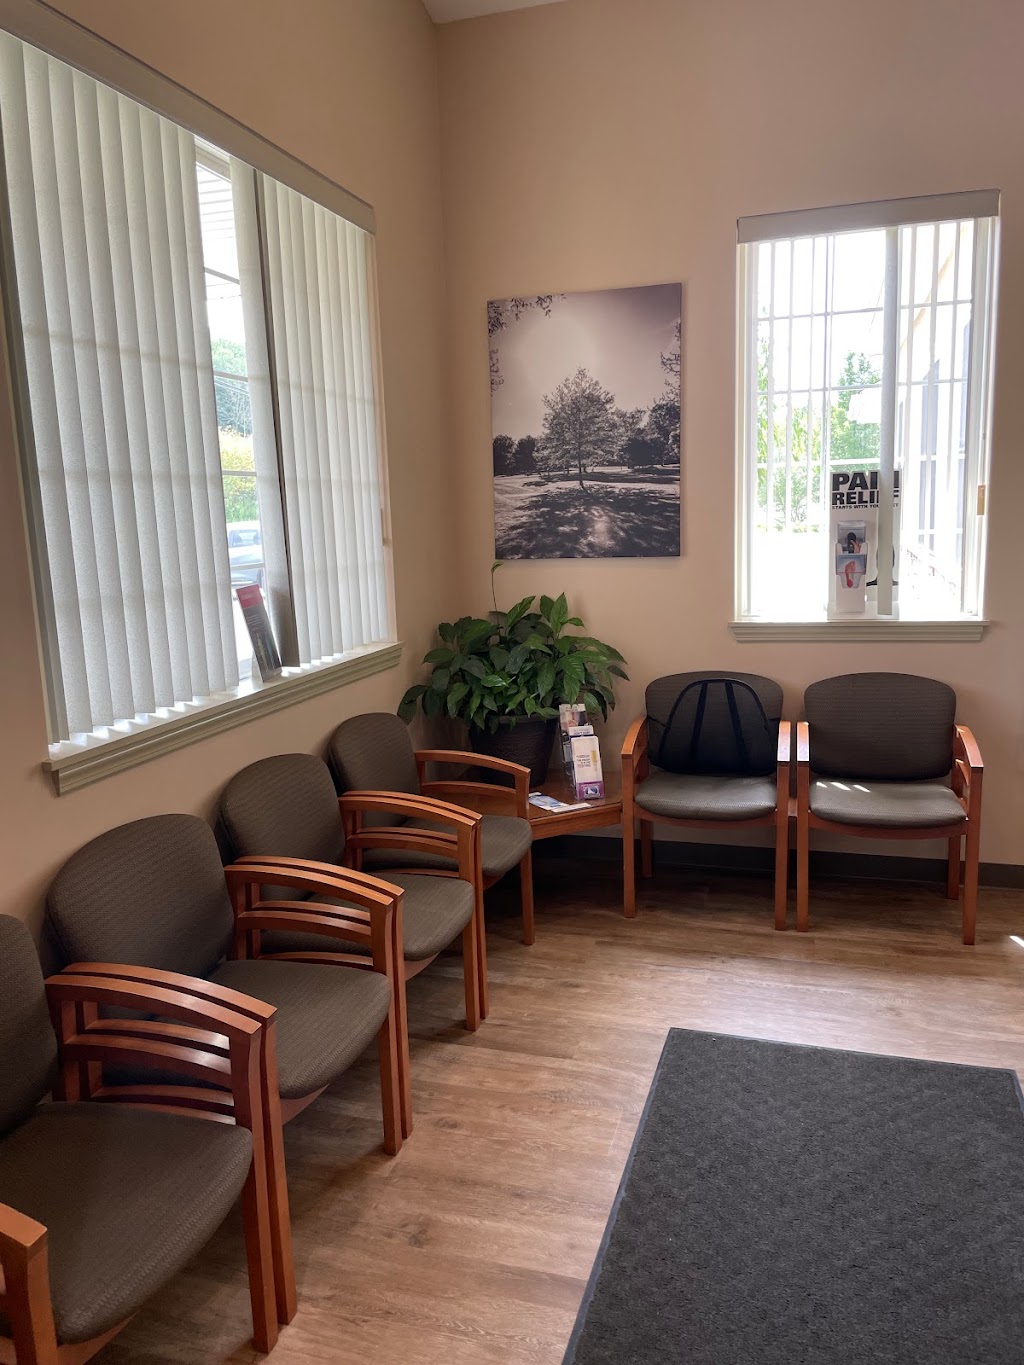 Vital Link Chiropractic | 1186 Church St, Moscow, PA 18444 | Phone: (570) 842-5131